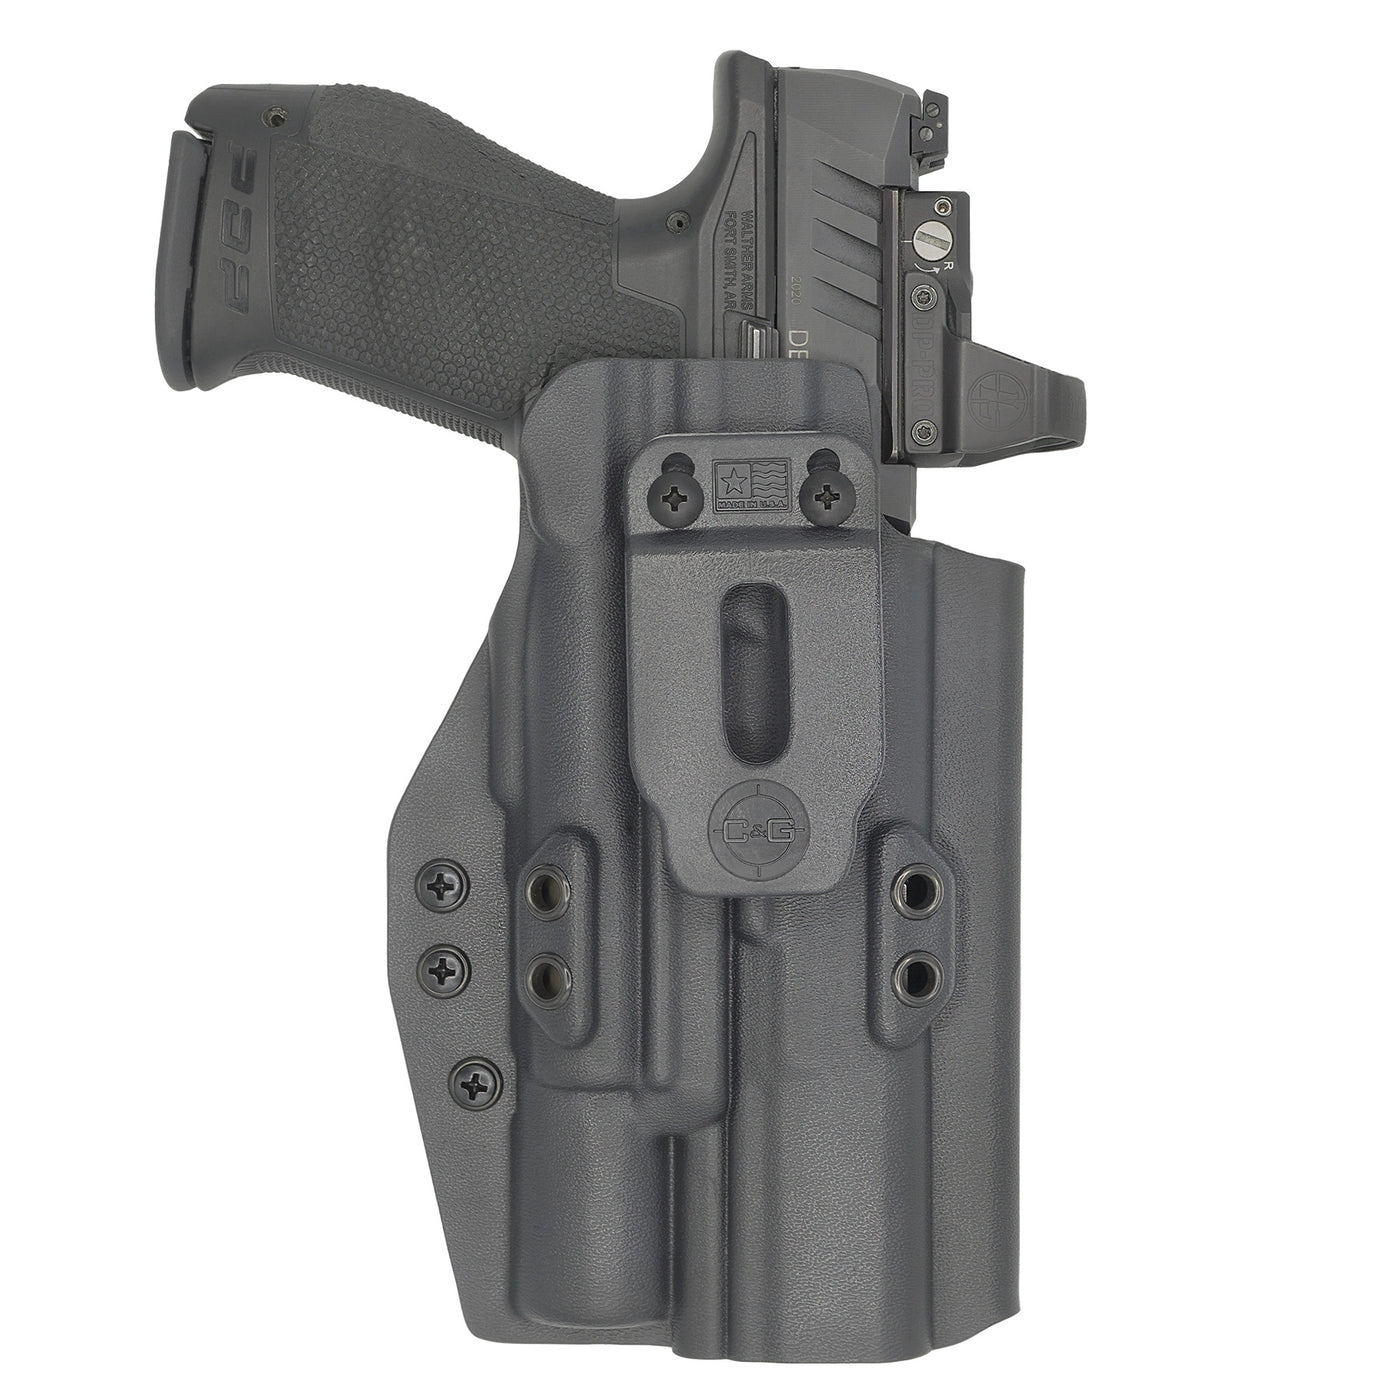 C&G Holsters Quickship IWB Tactical H&K P30 Surefire X300 in holstered position